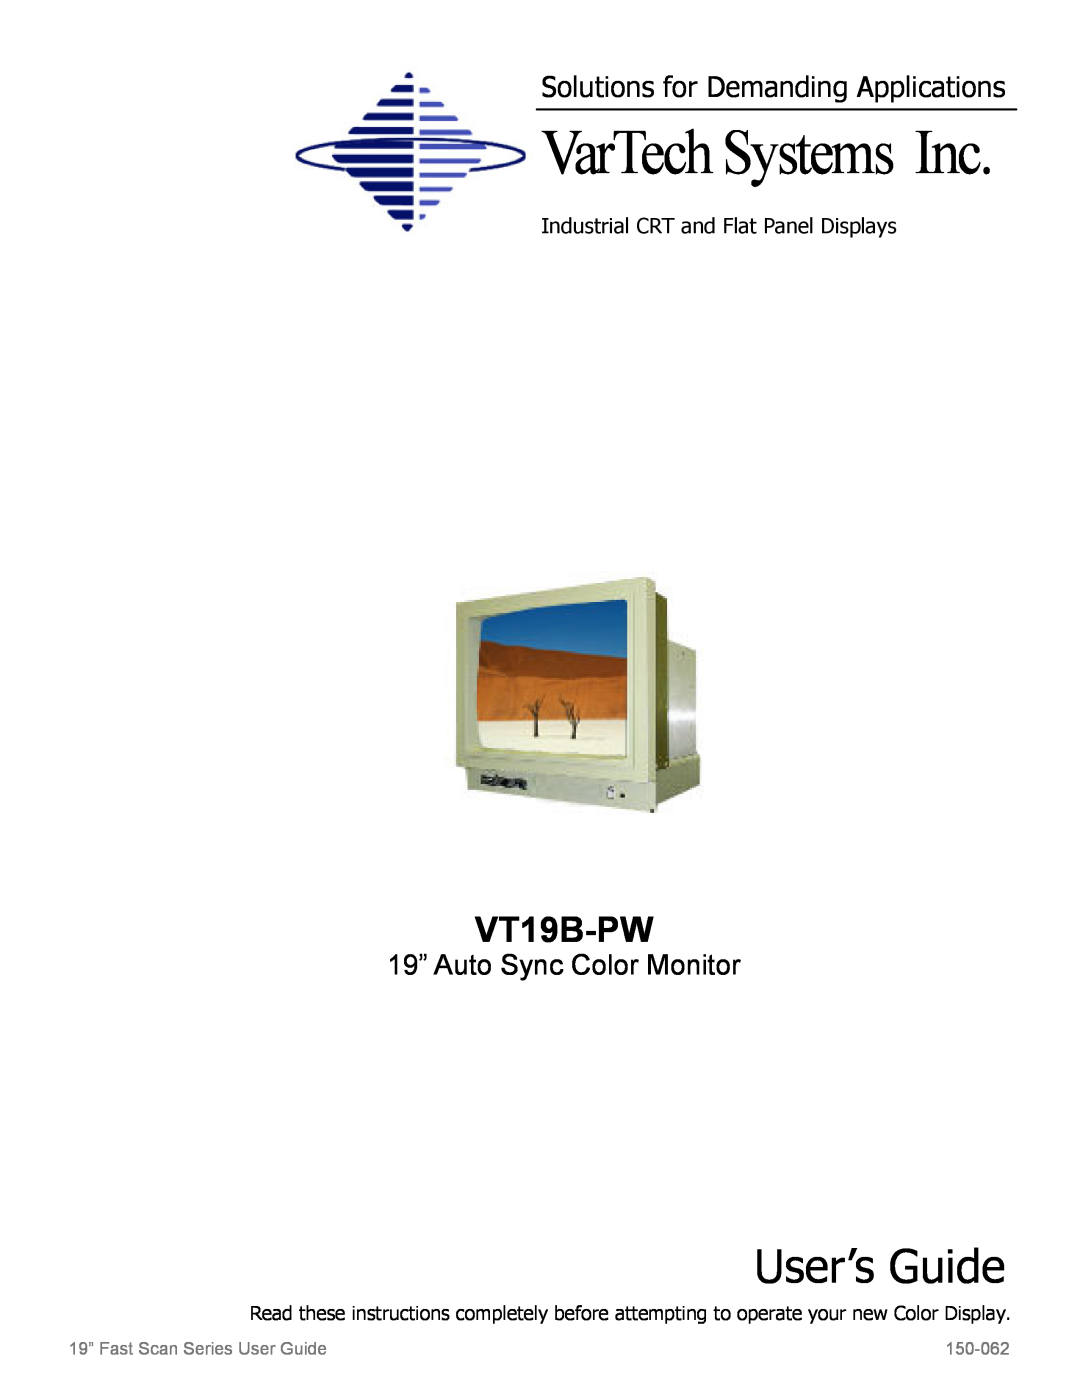 Sharp VT19B-PW manual VarTech Systems Inc, User’s Guide, Solutions for Demanding Applications, 19” Auto Sync Color Monitor 